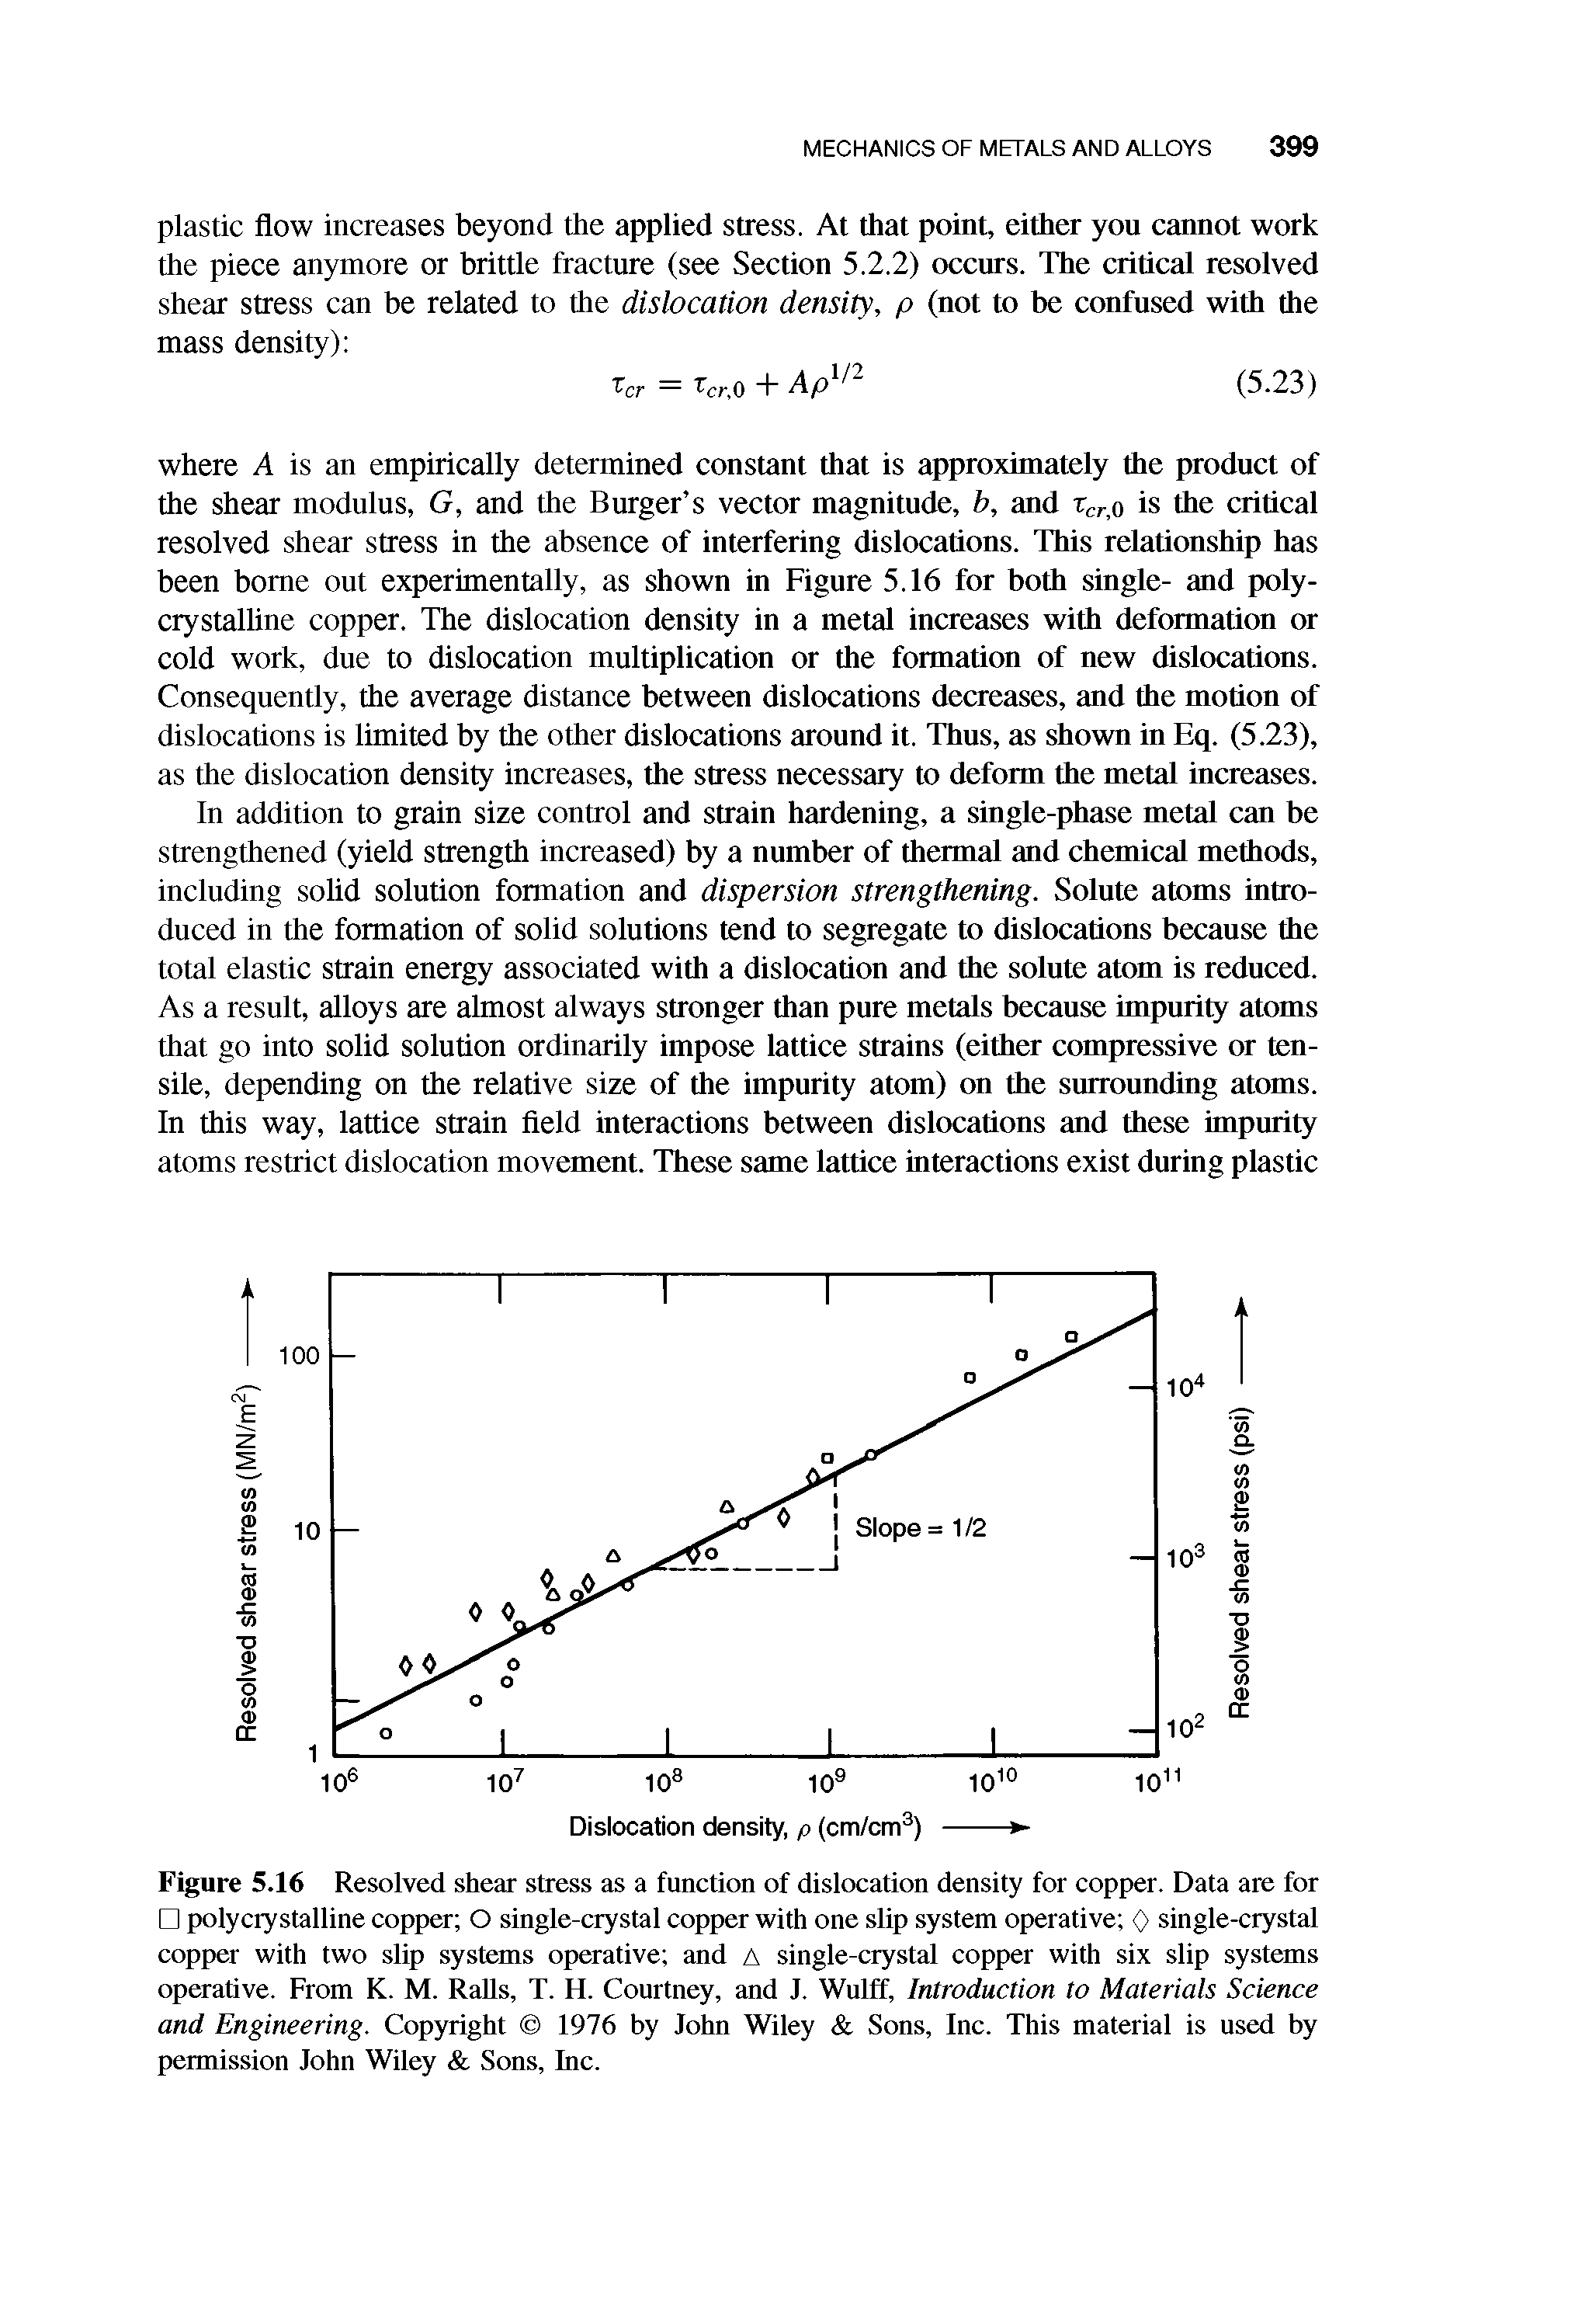 Figure 5.16 Resolved shear stress as a function of dislocation density for copper. Data are for polycrystalline copper O single-crystal copper with one slip system operative 0 single-crystal copper with two slip systems operative and A single-crystal copper with six slip systems operative. From K. M. Rails, T. H. Courtney, and J. Wulff, Introduction to Materials Science and Engineering. Copyright 1976 by John Wiley Sons, Inc. This material is used by permission John Wiley Sons, Inc.